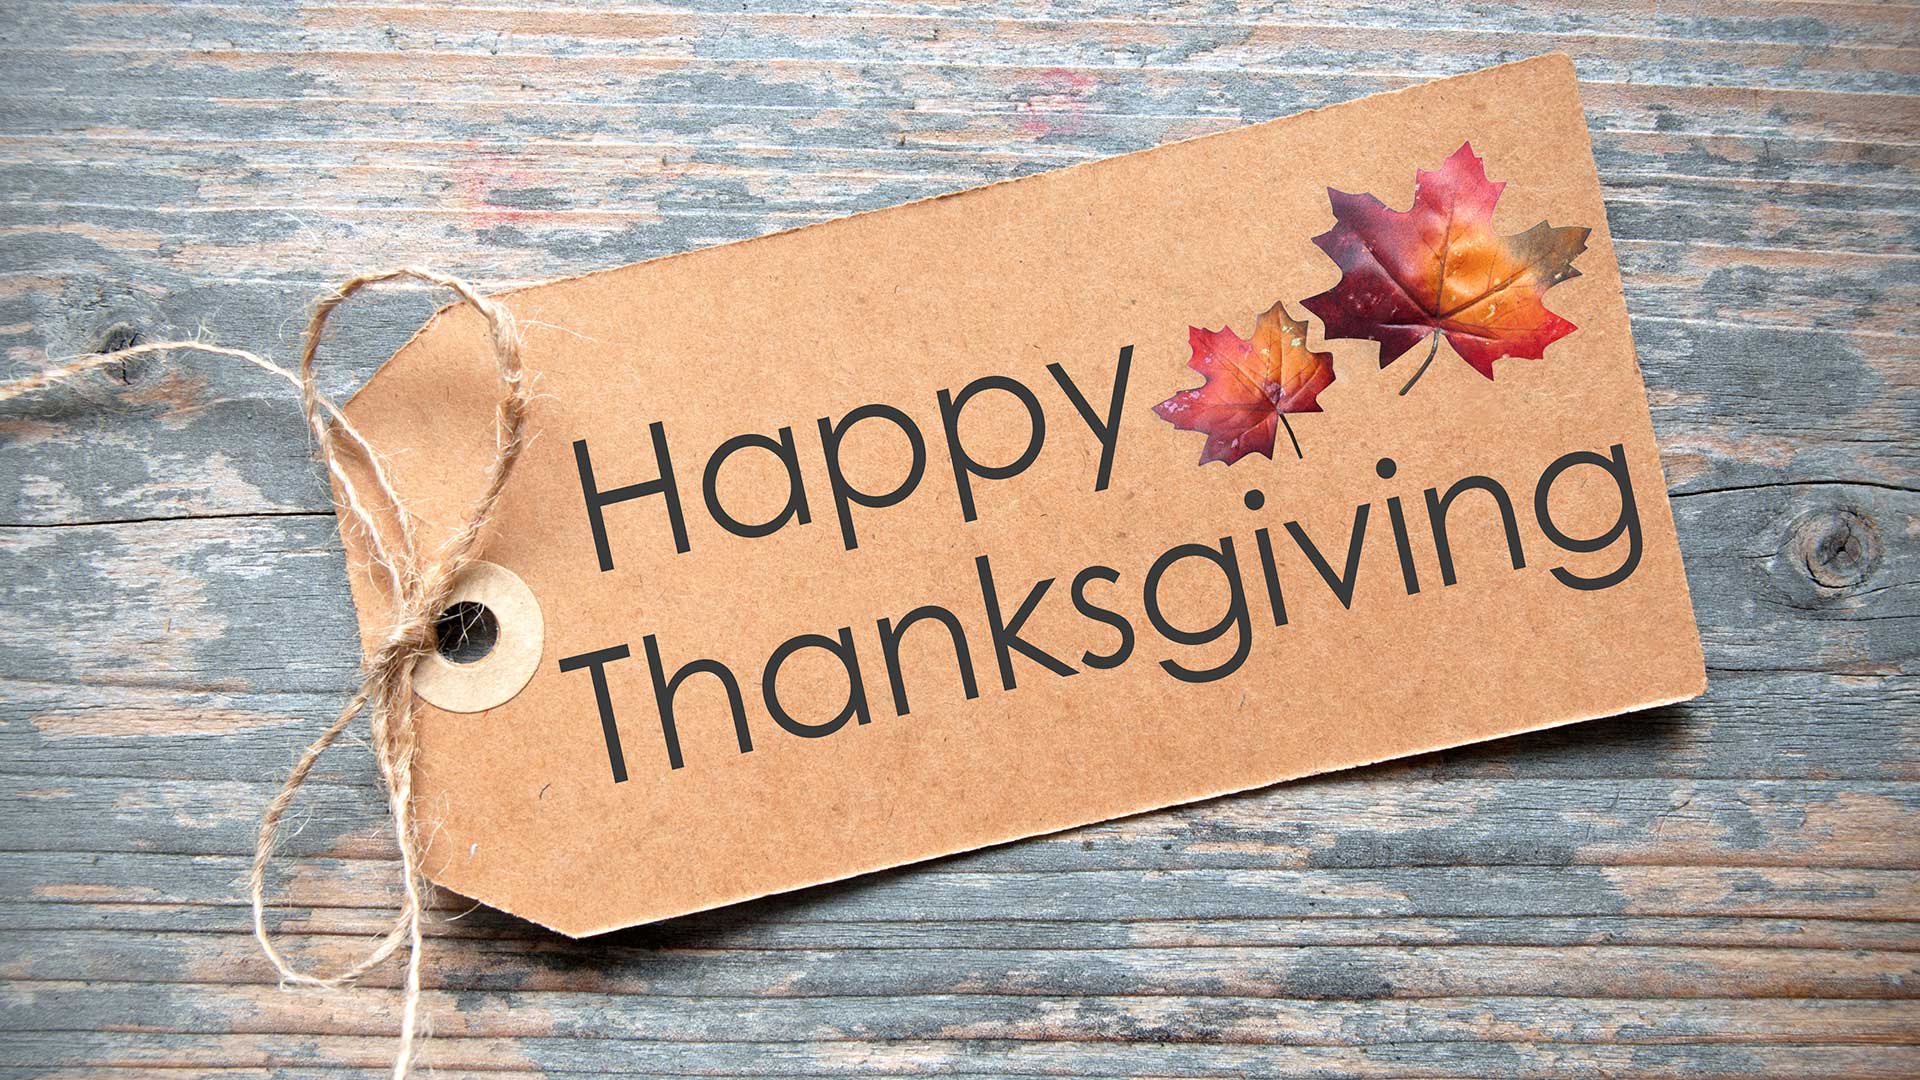 Label with the words "Happy Thanksgiving"